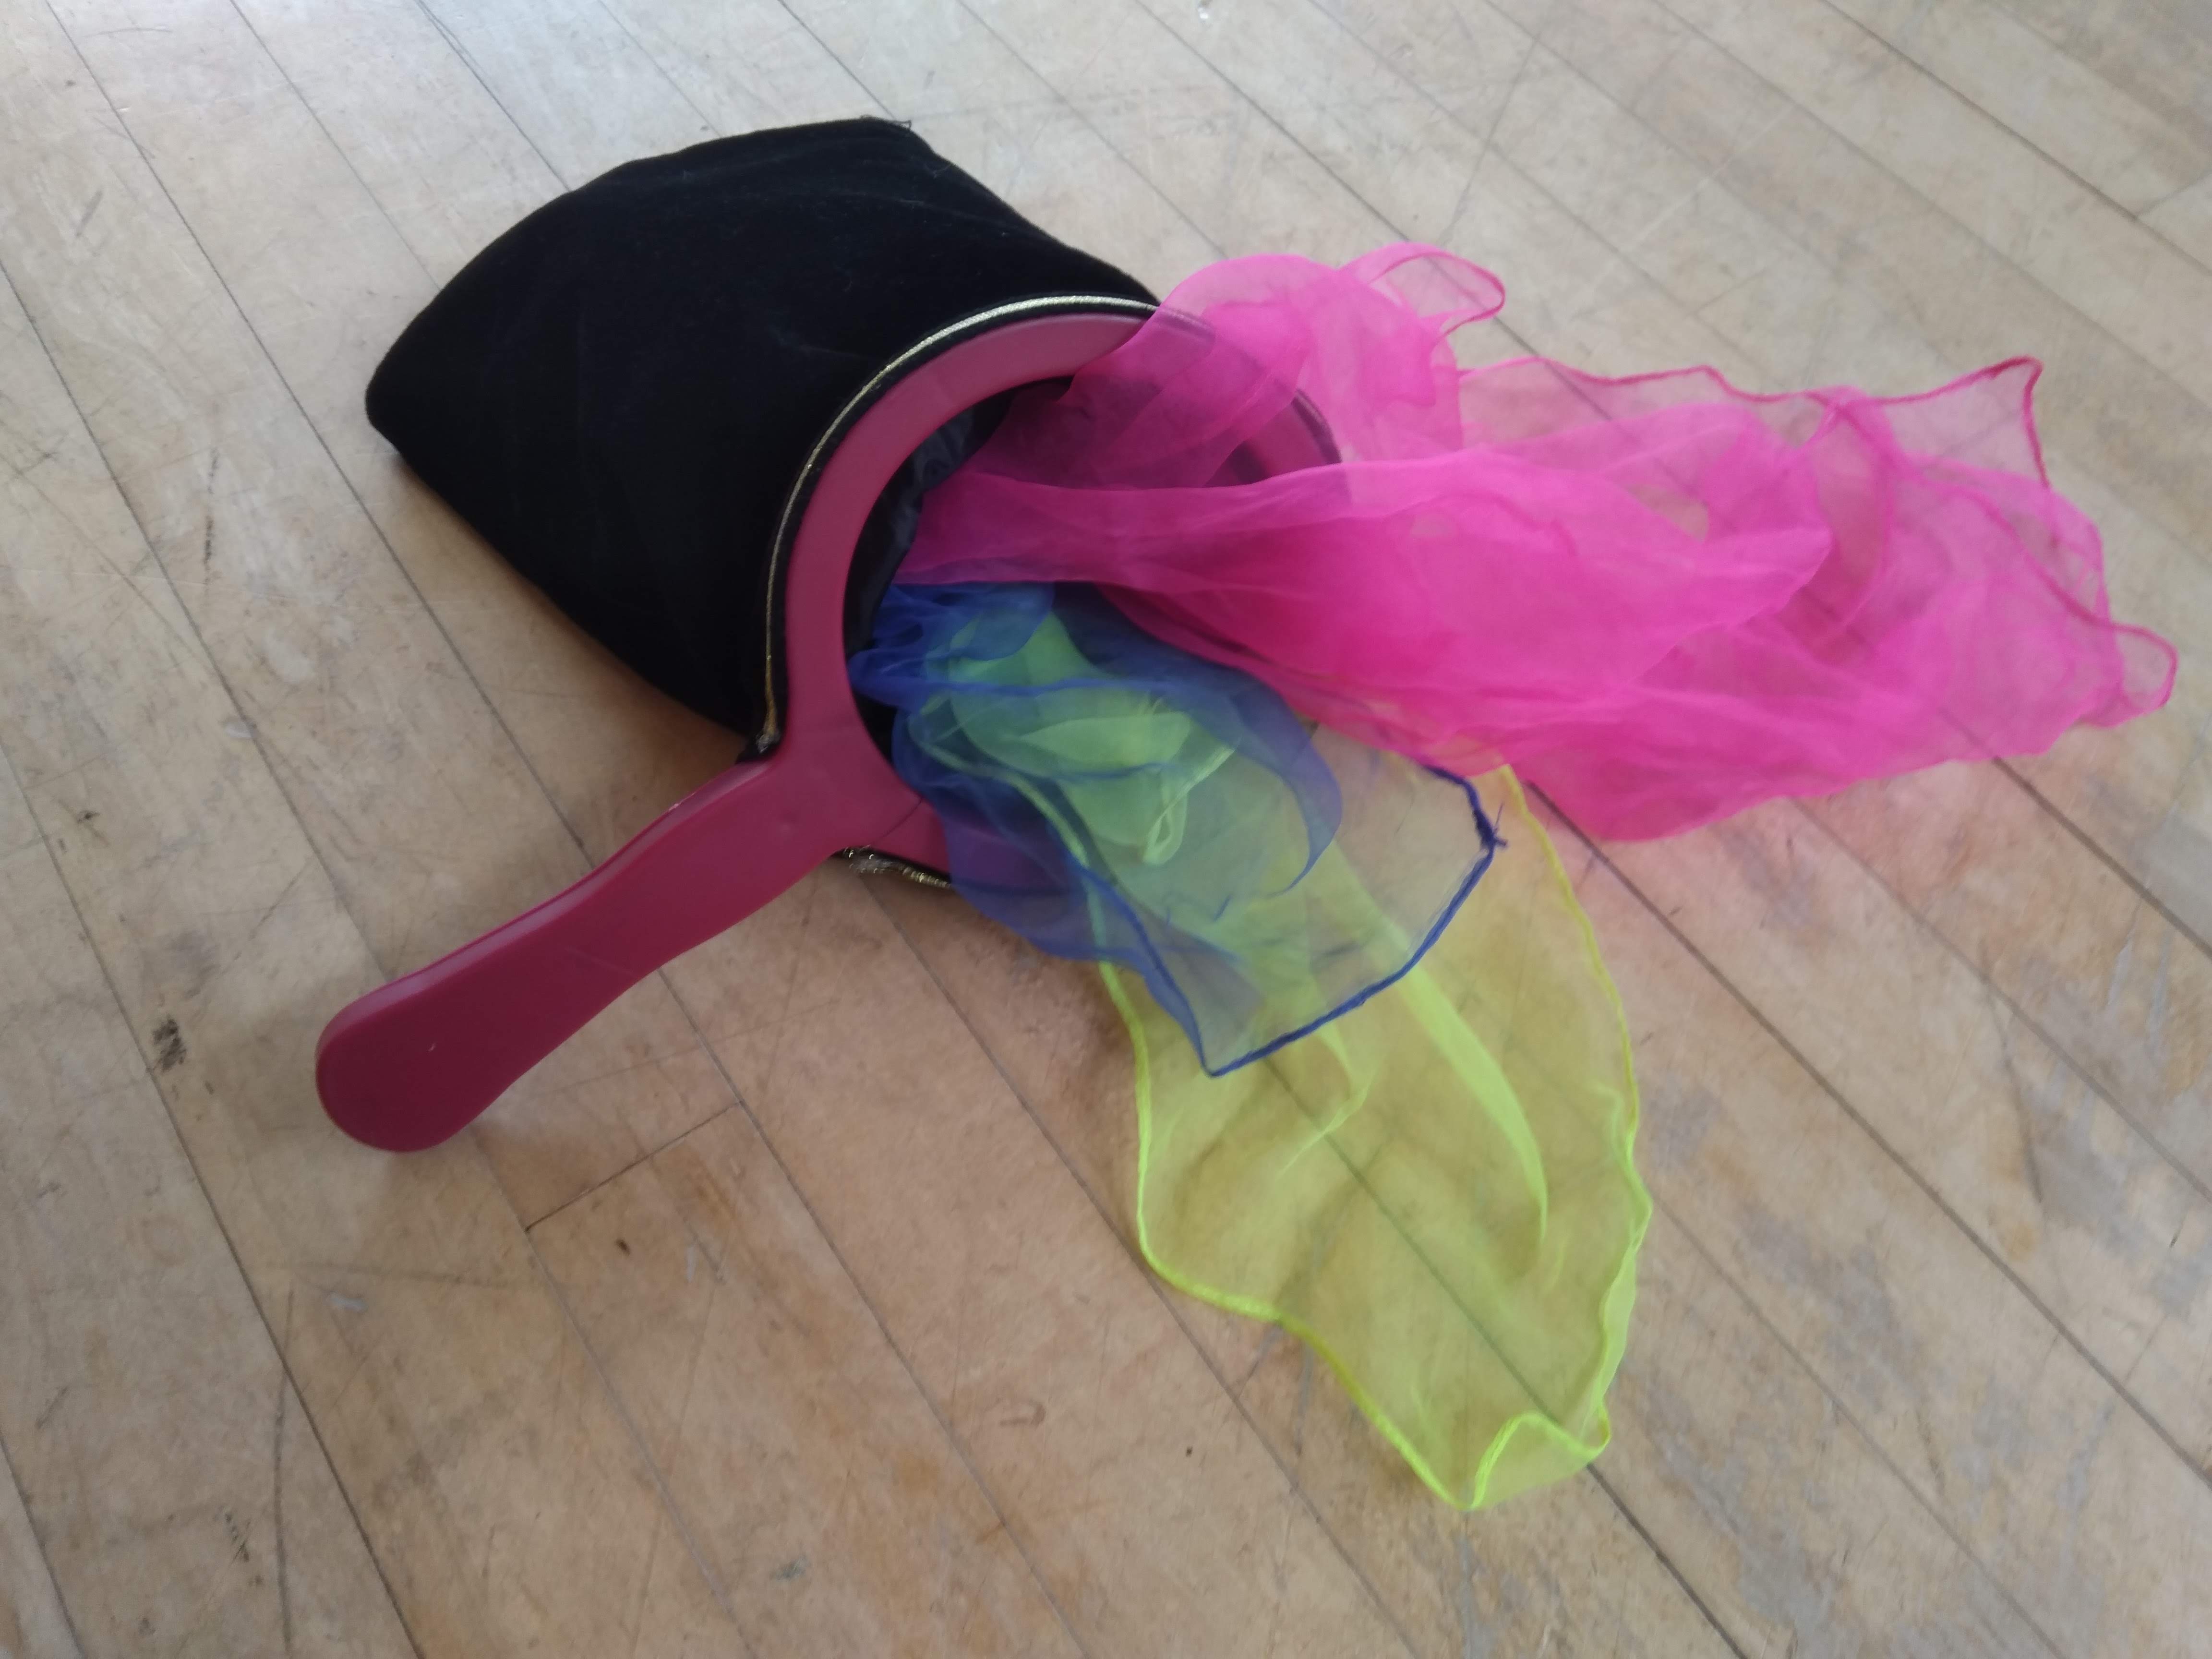 Juggling Scarfs (perhaps you can produce them from a Vanishing Purse?!)